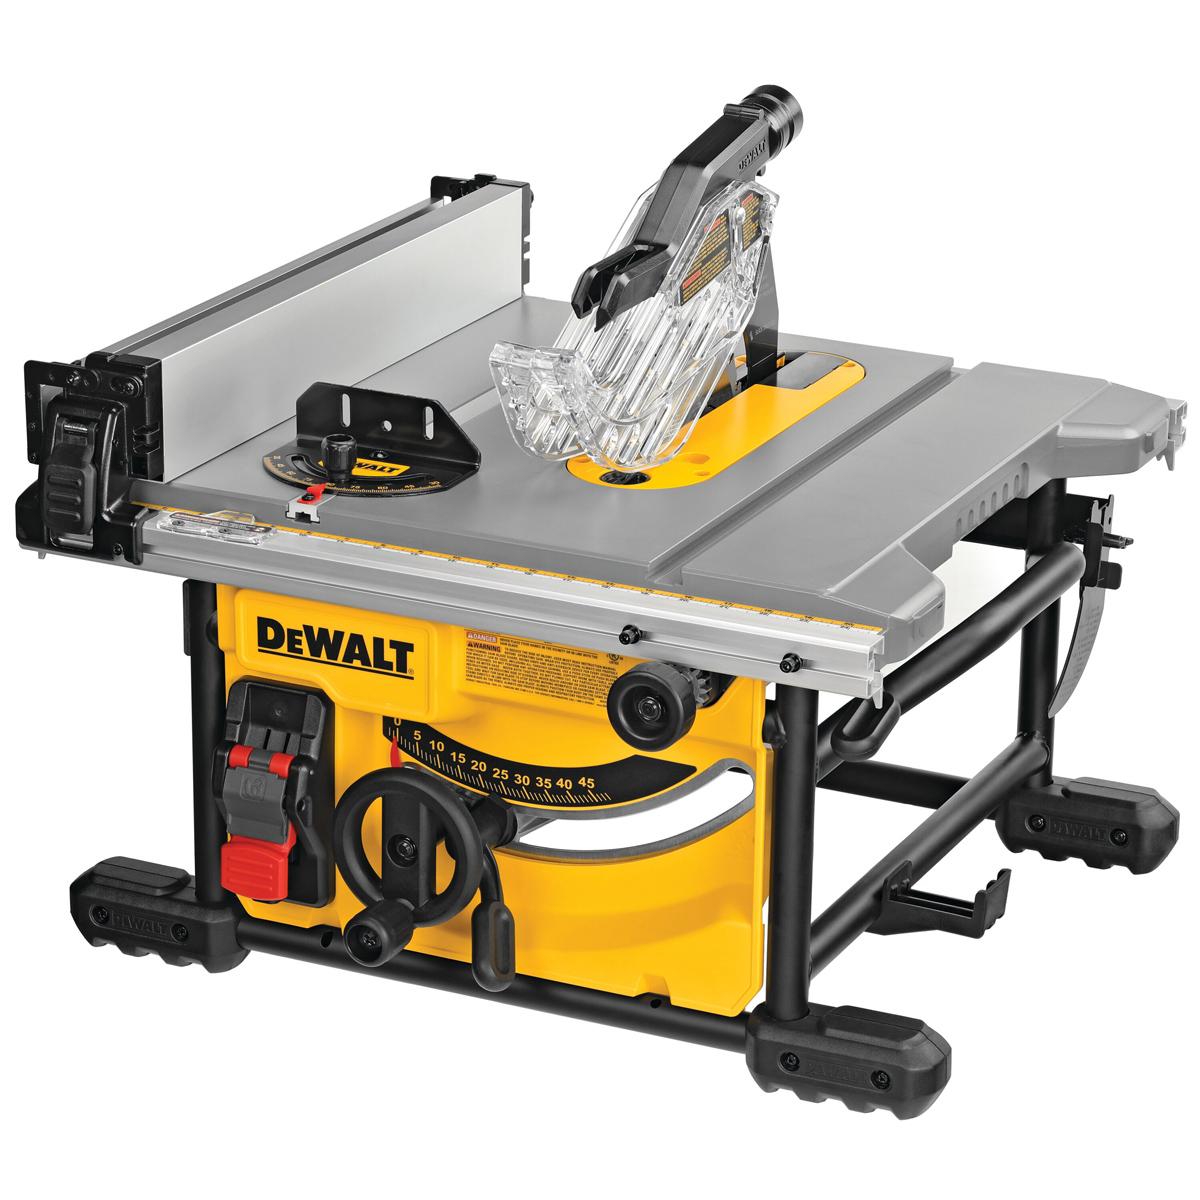 DeWALT Compact Jobsite Table Saw with Compact Table Saw Stand for $299 Shipped